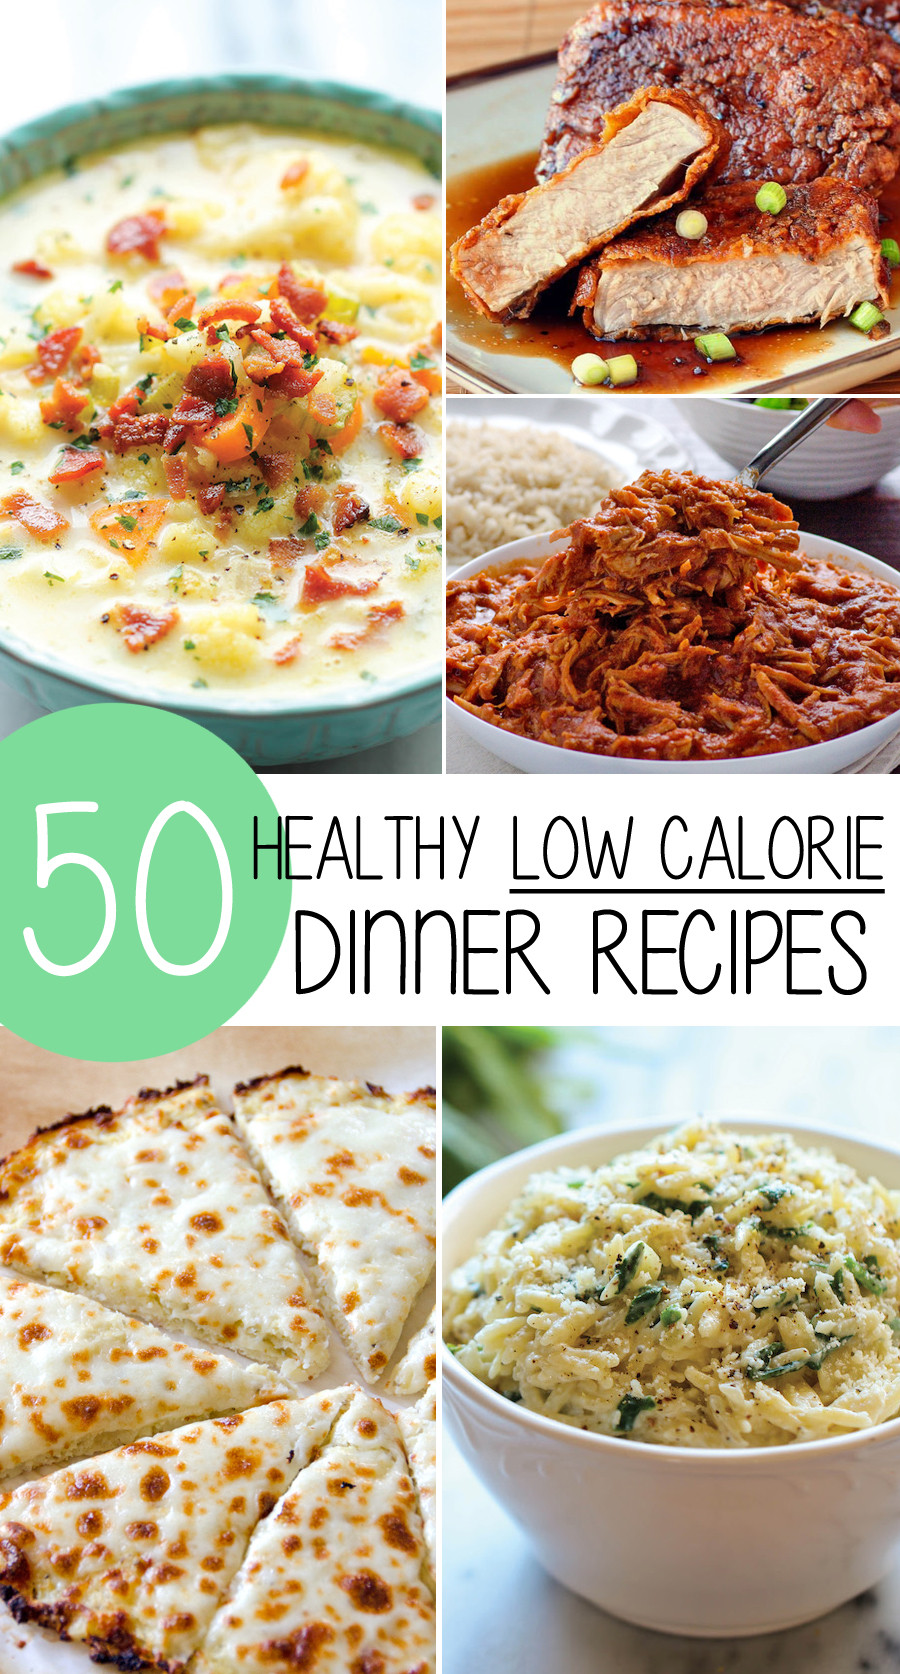 Low Calorie Recipes
 50 Healthy Low Calorie Weight Loss Dinner Recipes